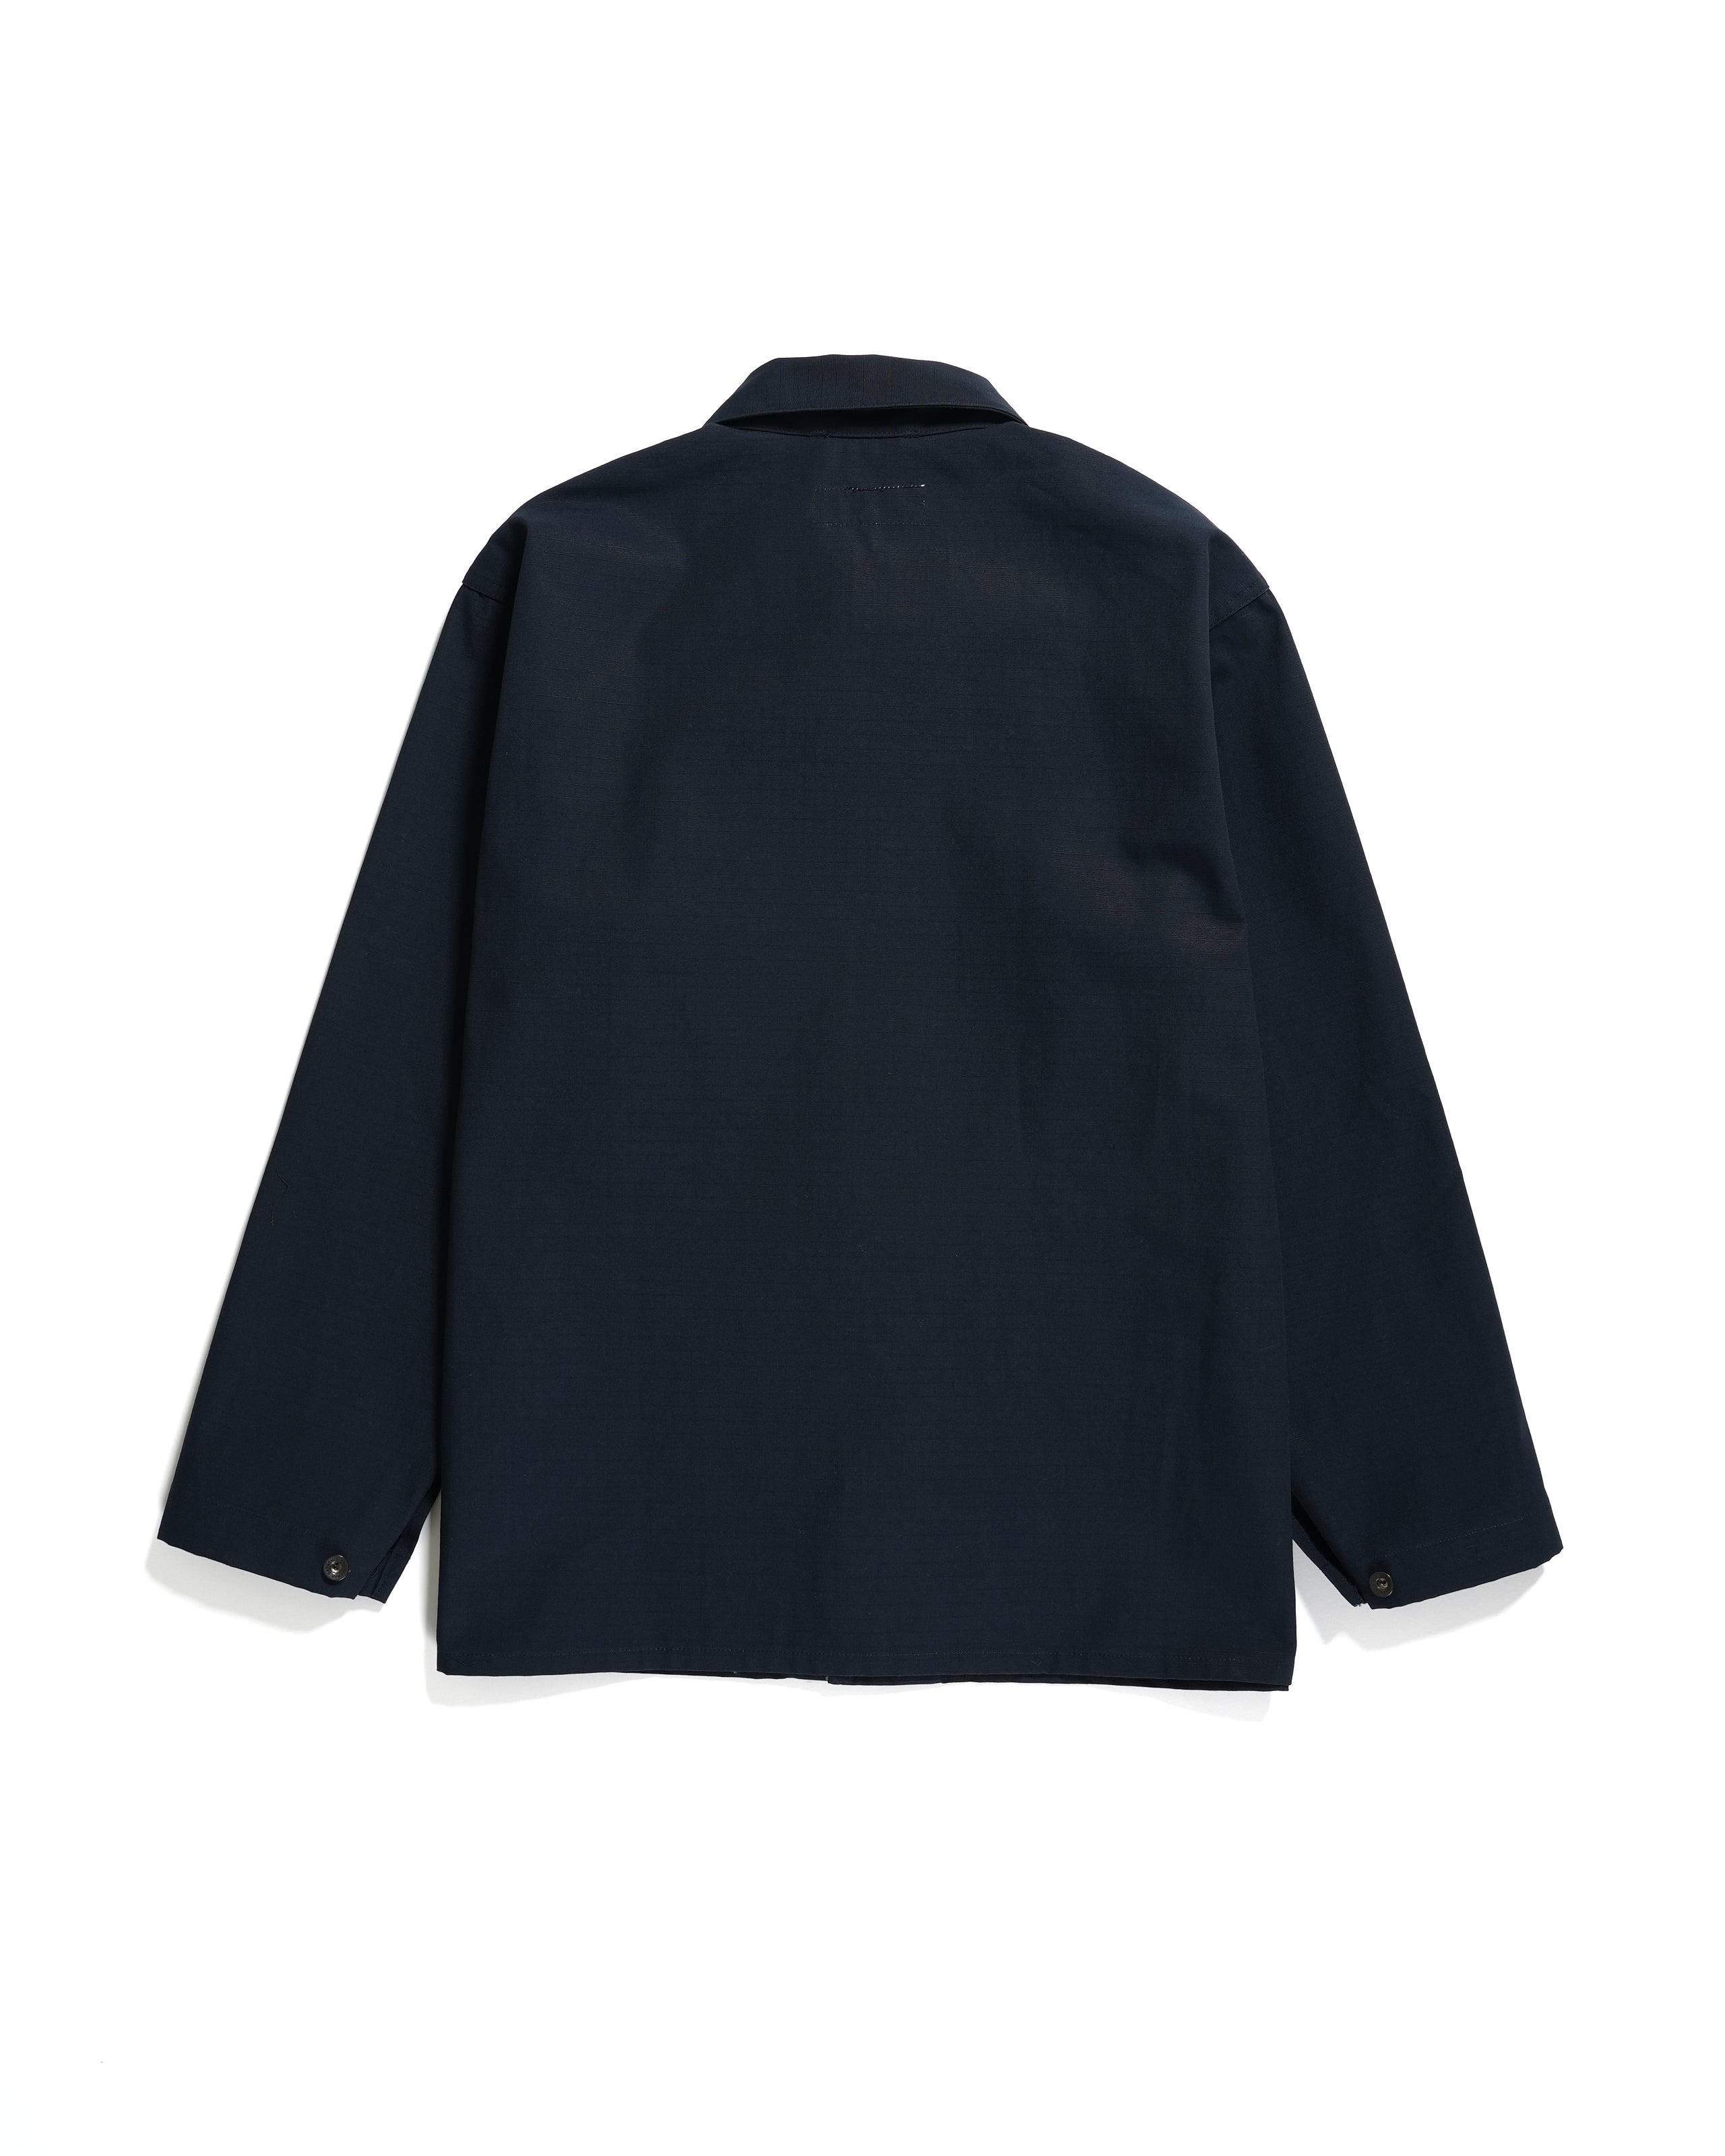 Engineered Garments Workaday – Totem Brand Co.